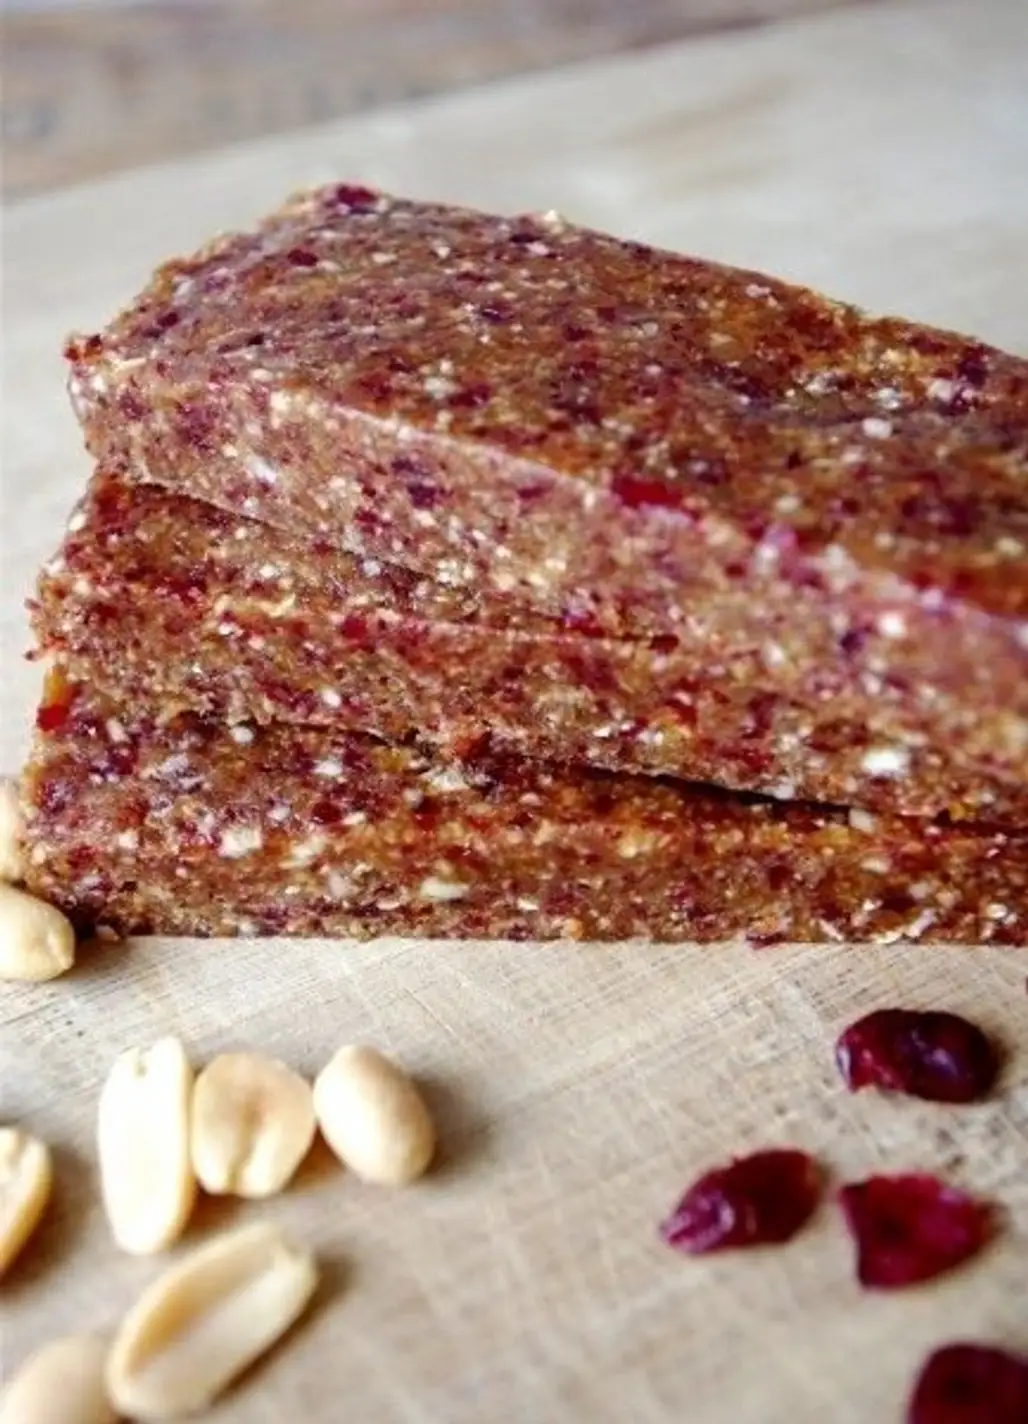 Peanut Butter and Jelly Energy Bars